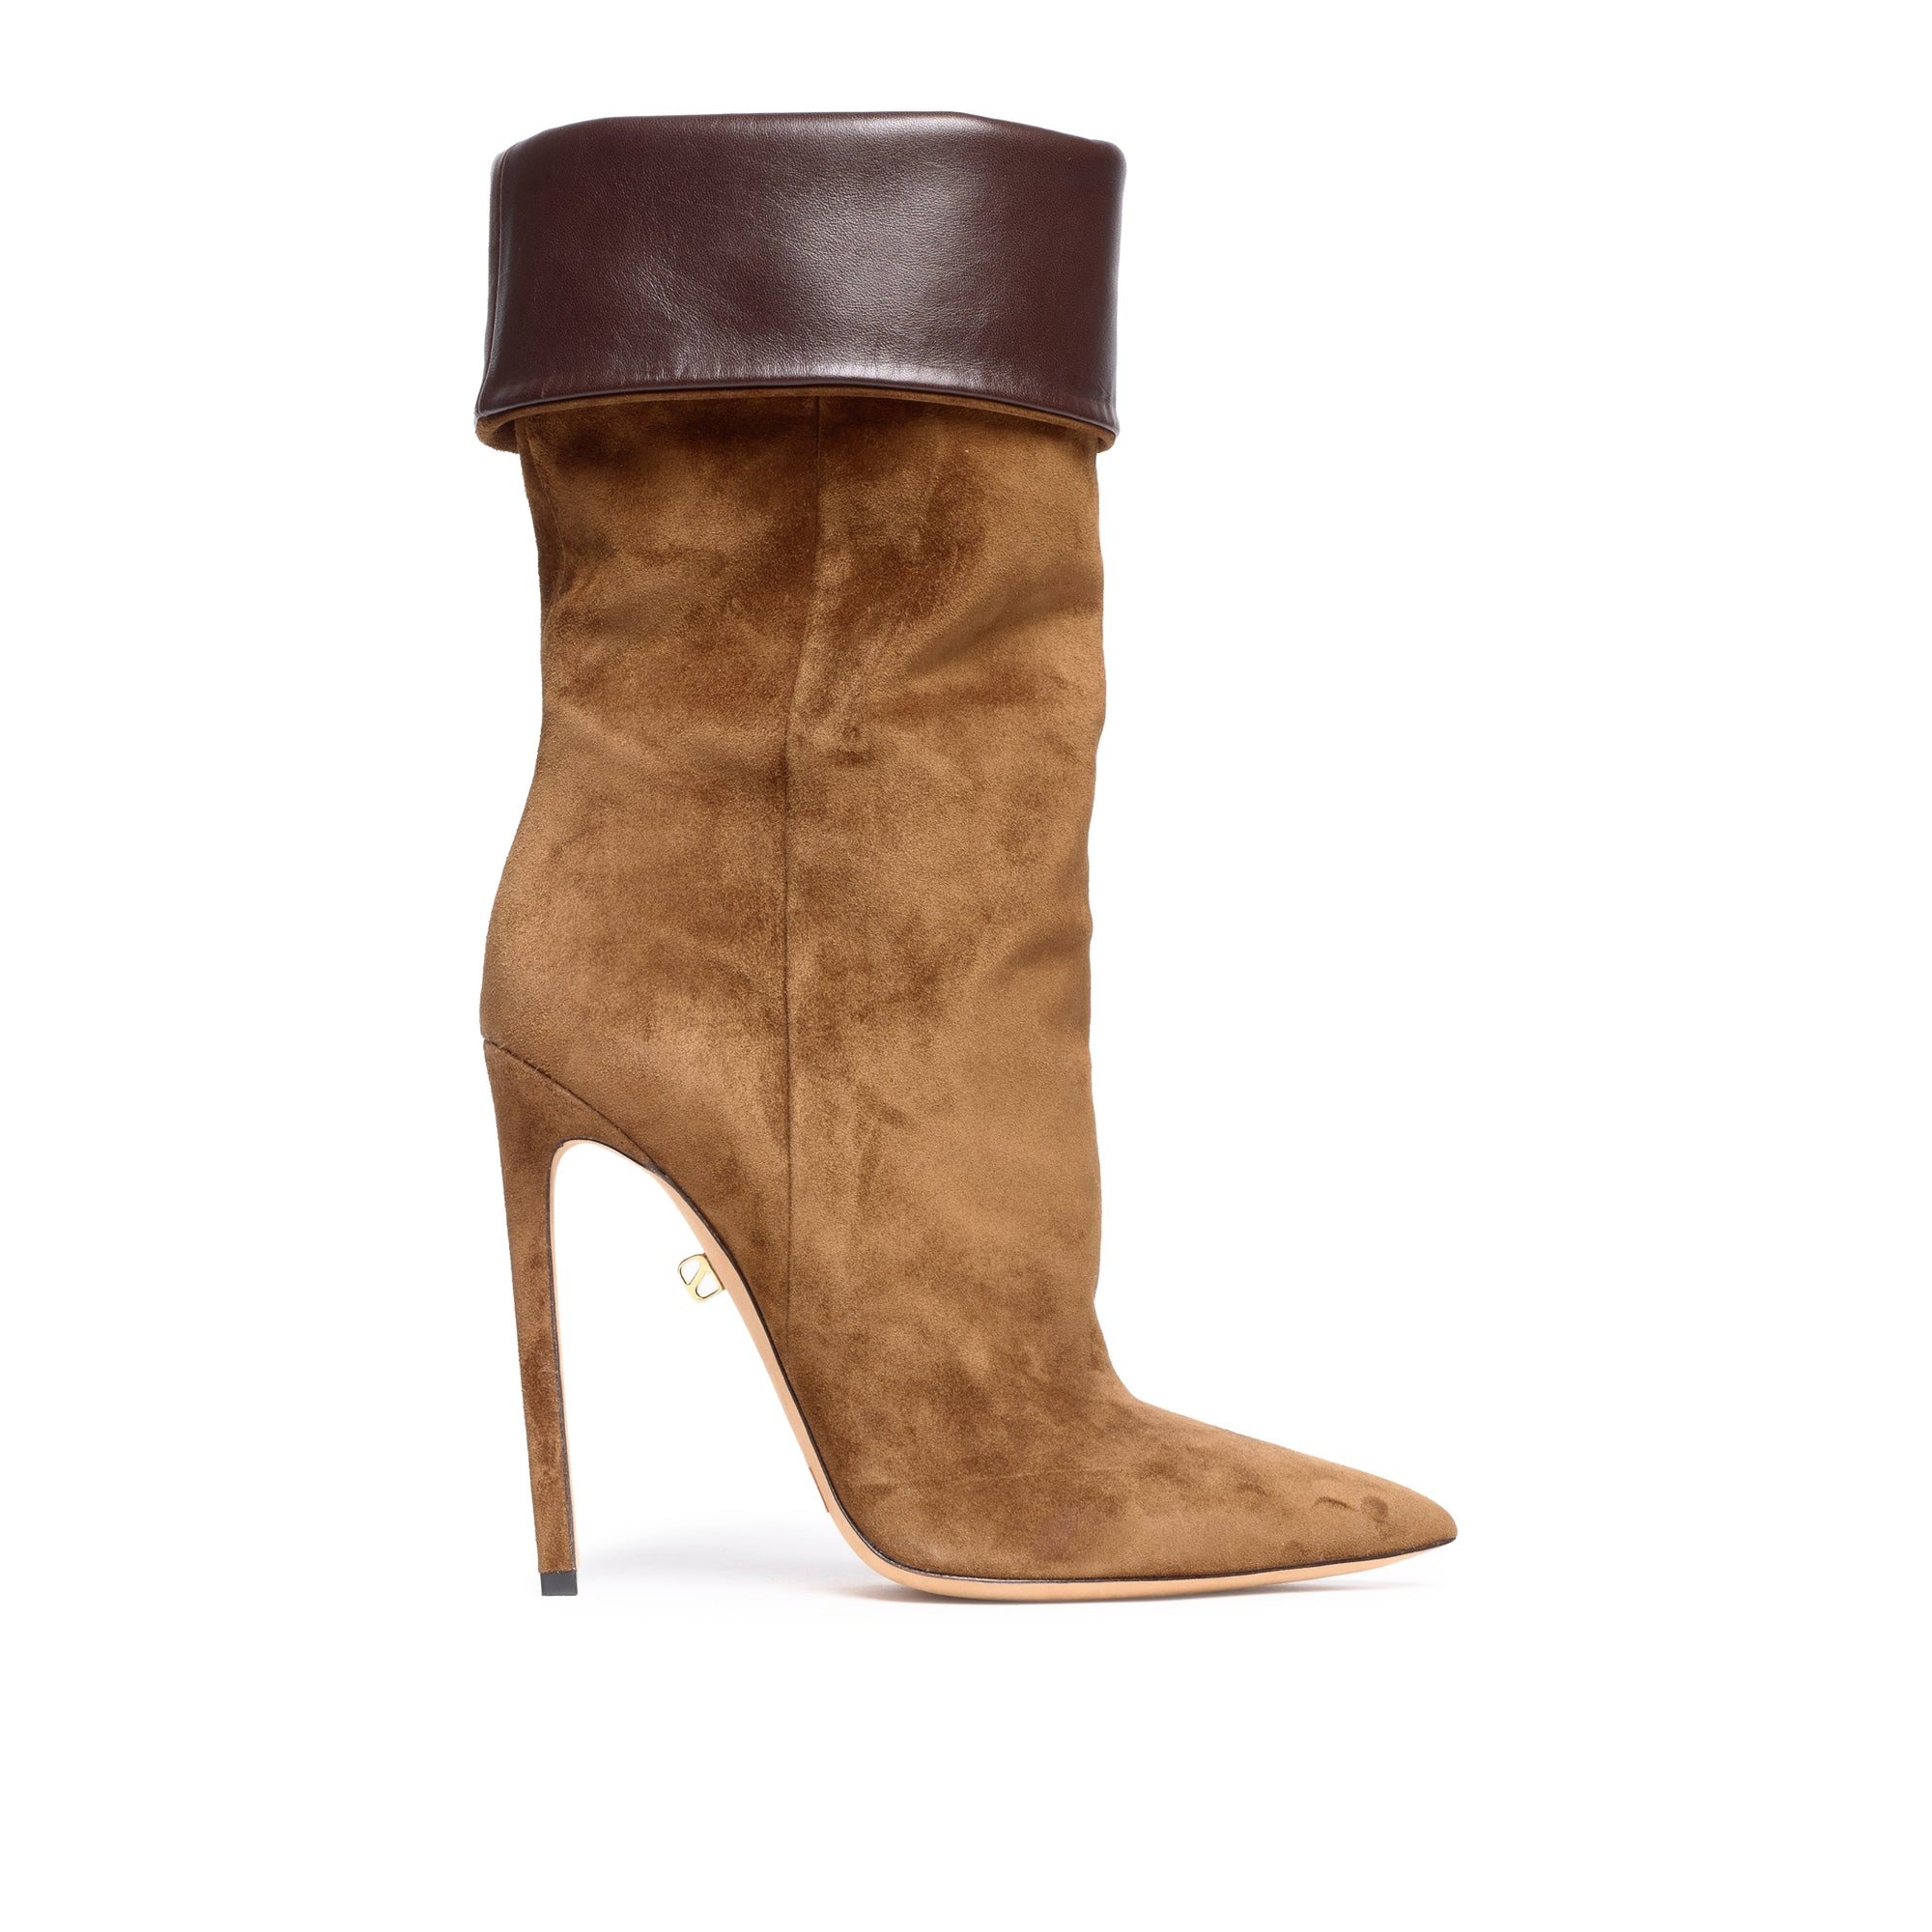 Sofia 120 heeled boots in suede - Espresso